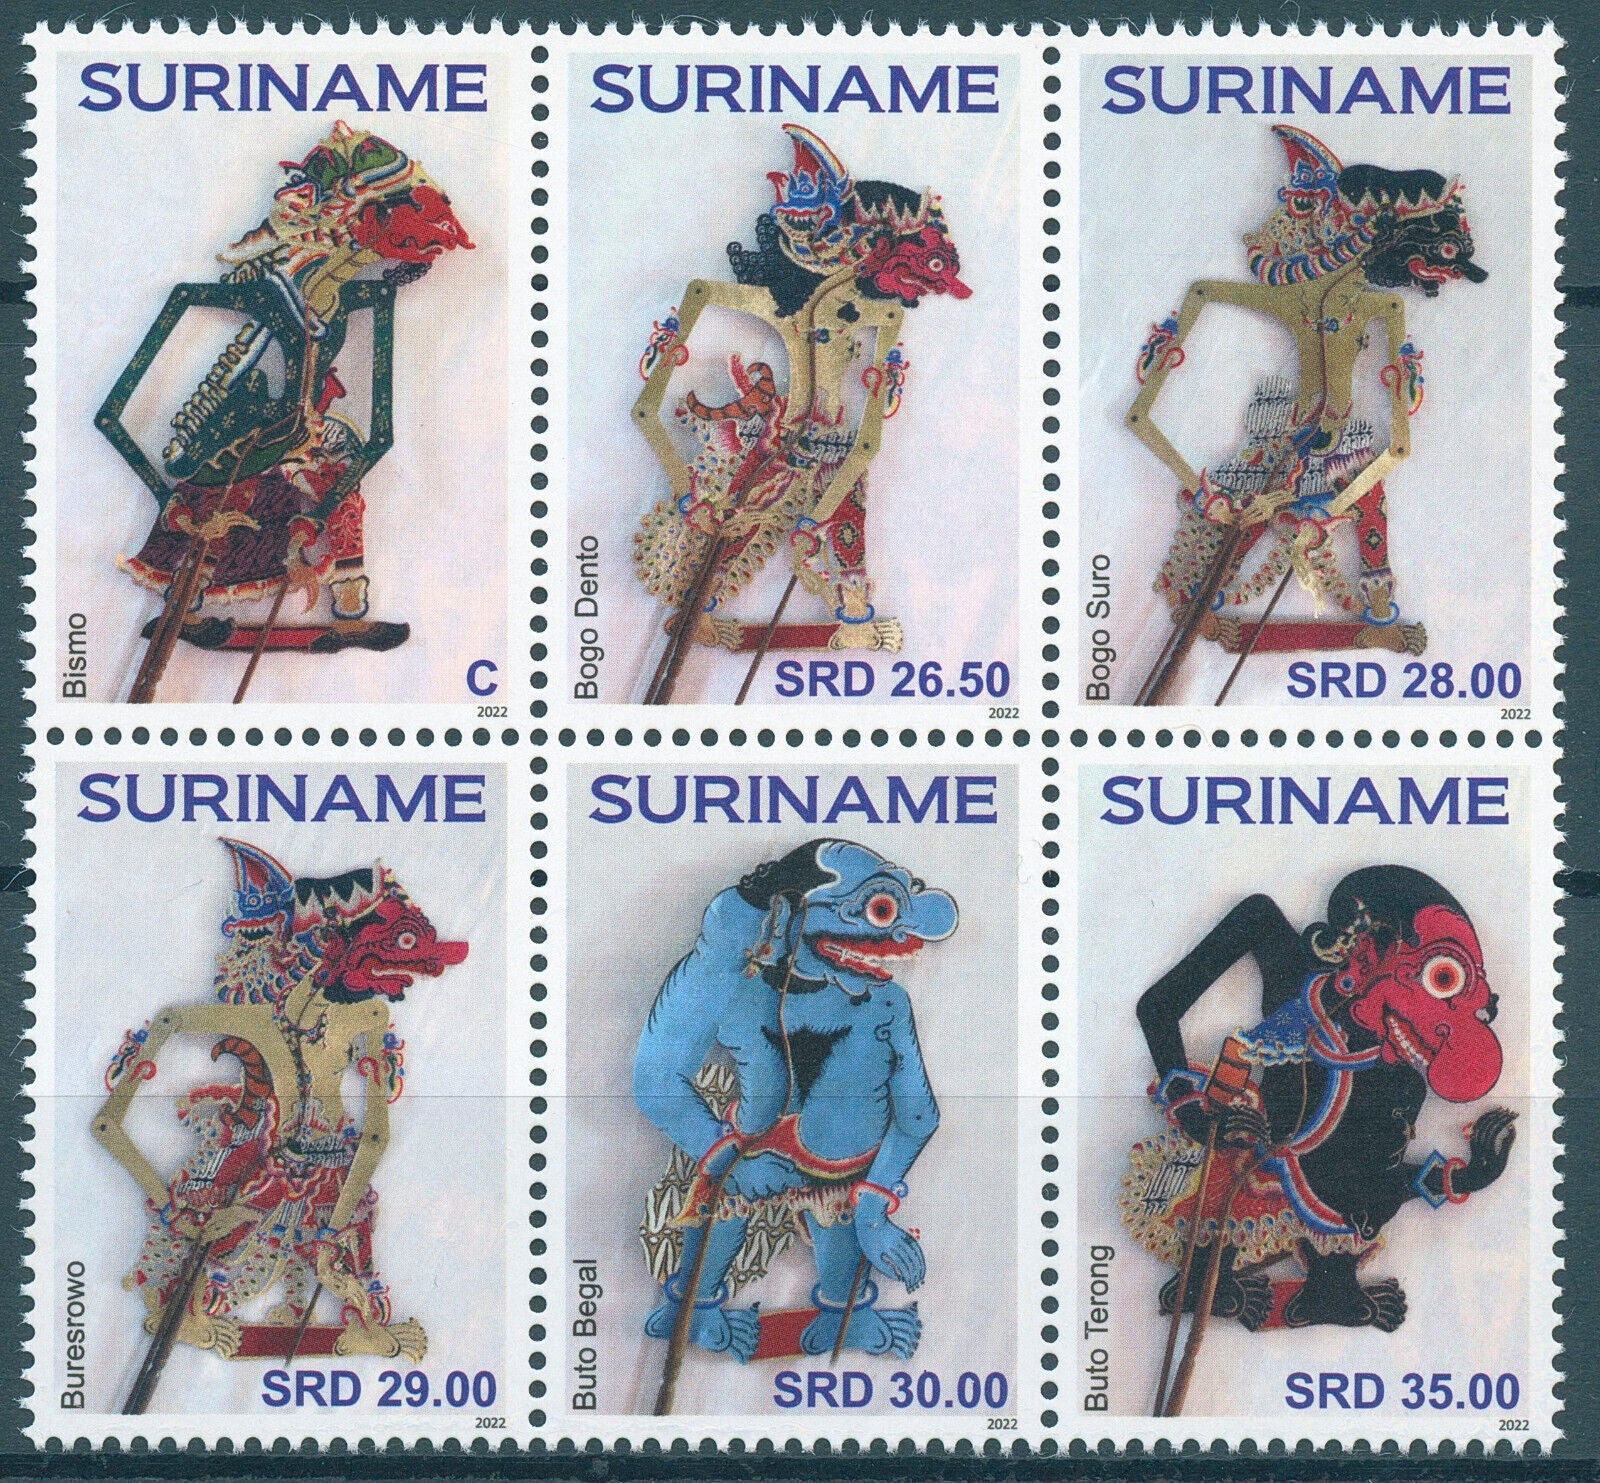 Suriname 2022 MNH Cultures Stamps Wayang Puppets Traditions 6v Block